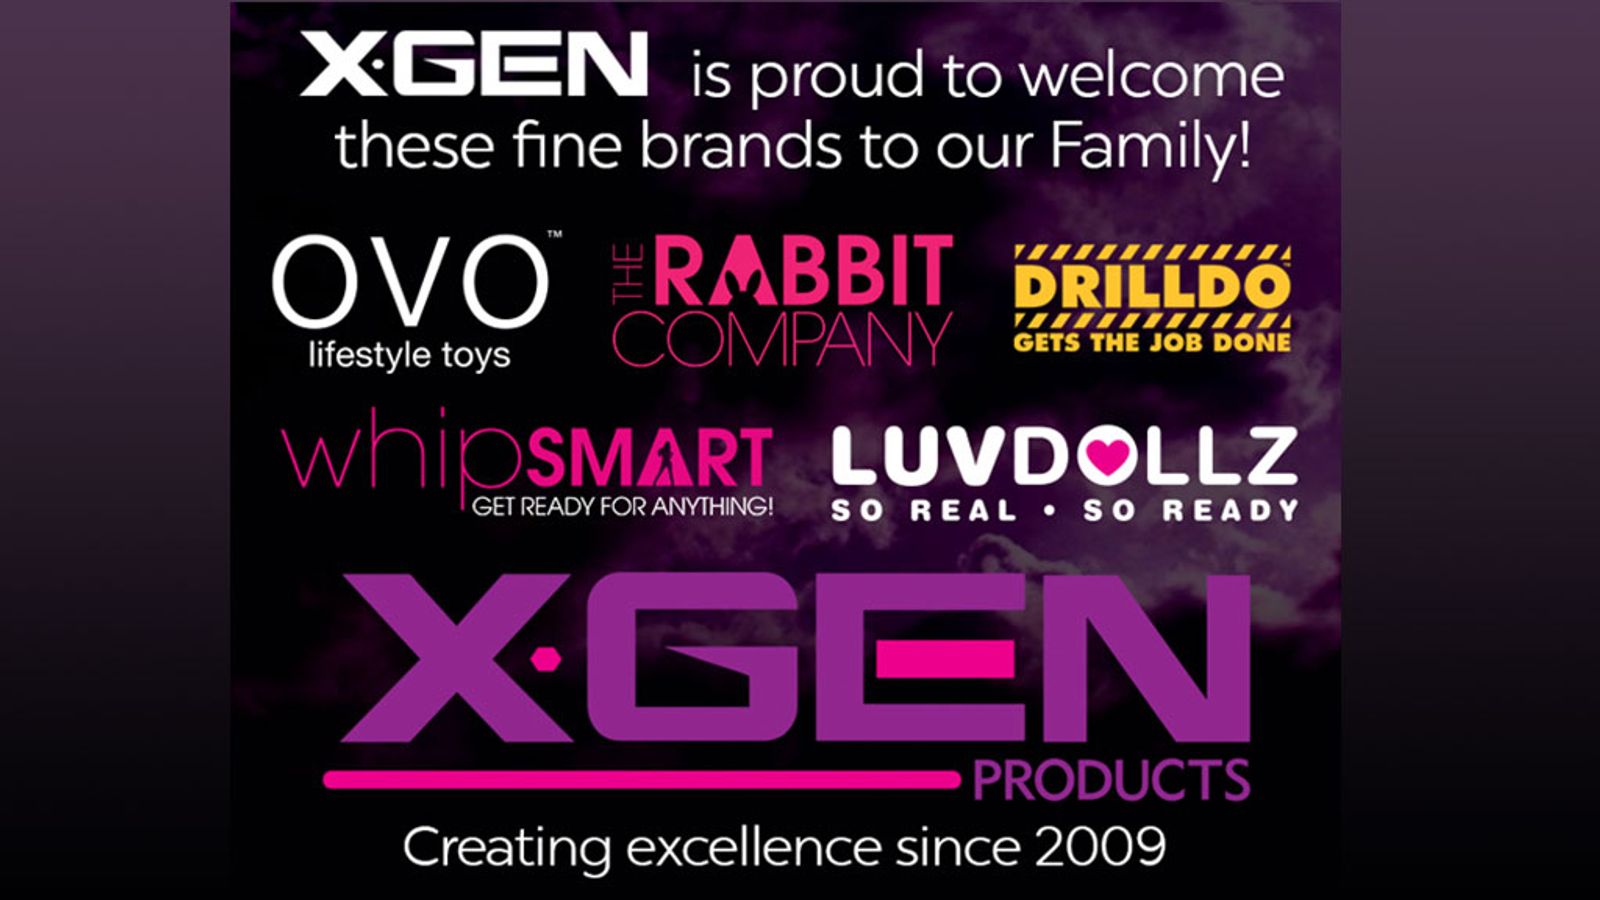 Xgen Products Acquires Rabbit Company, Ovo Lifestyle Toys, Others